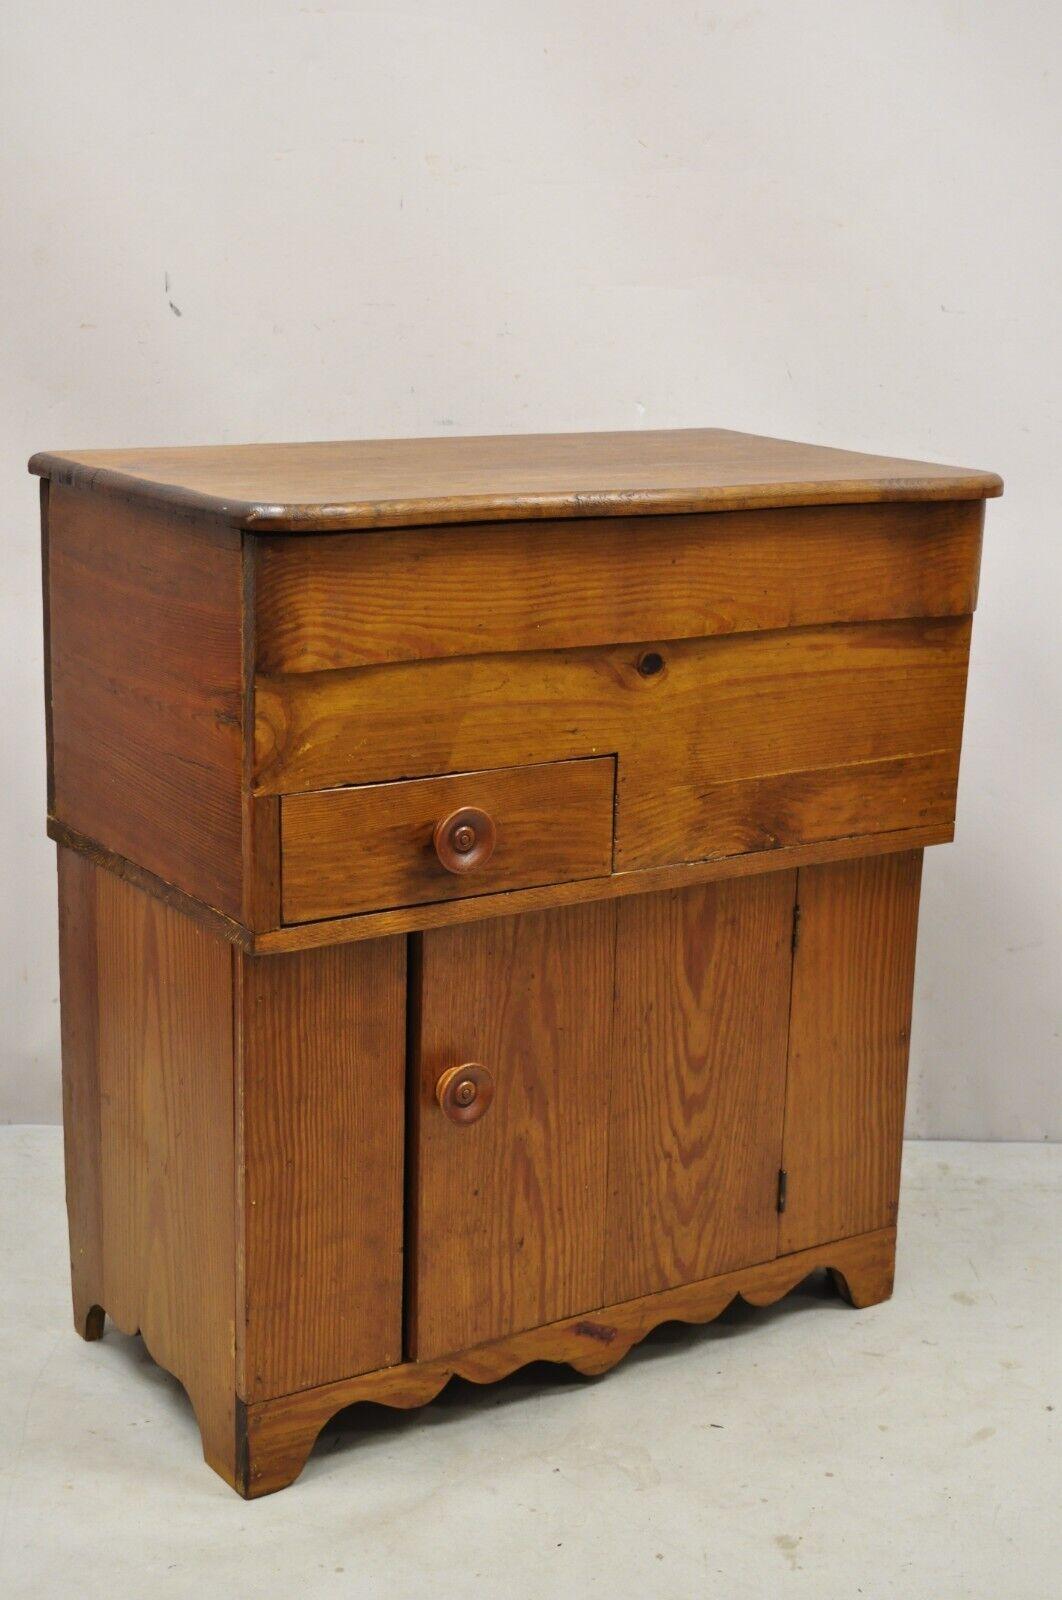 Antique 19th century primitive colonial pine wood flip top washstand cabinet. Item features a flip top, single drawer, single cabinet door, solid wood construction, beautiful wood grain, very nice antique item, great style and form. Circa 19th